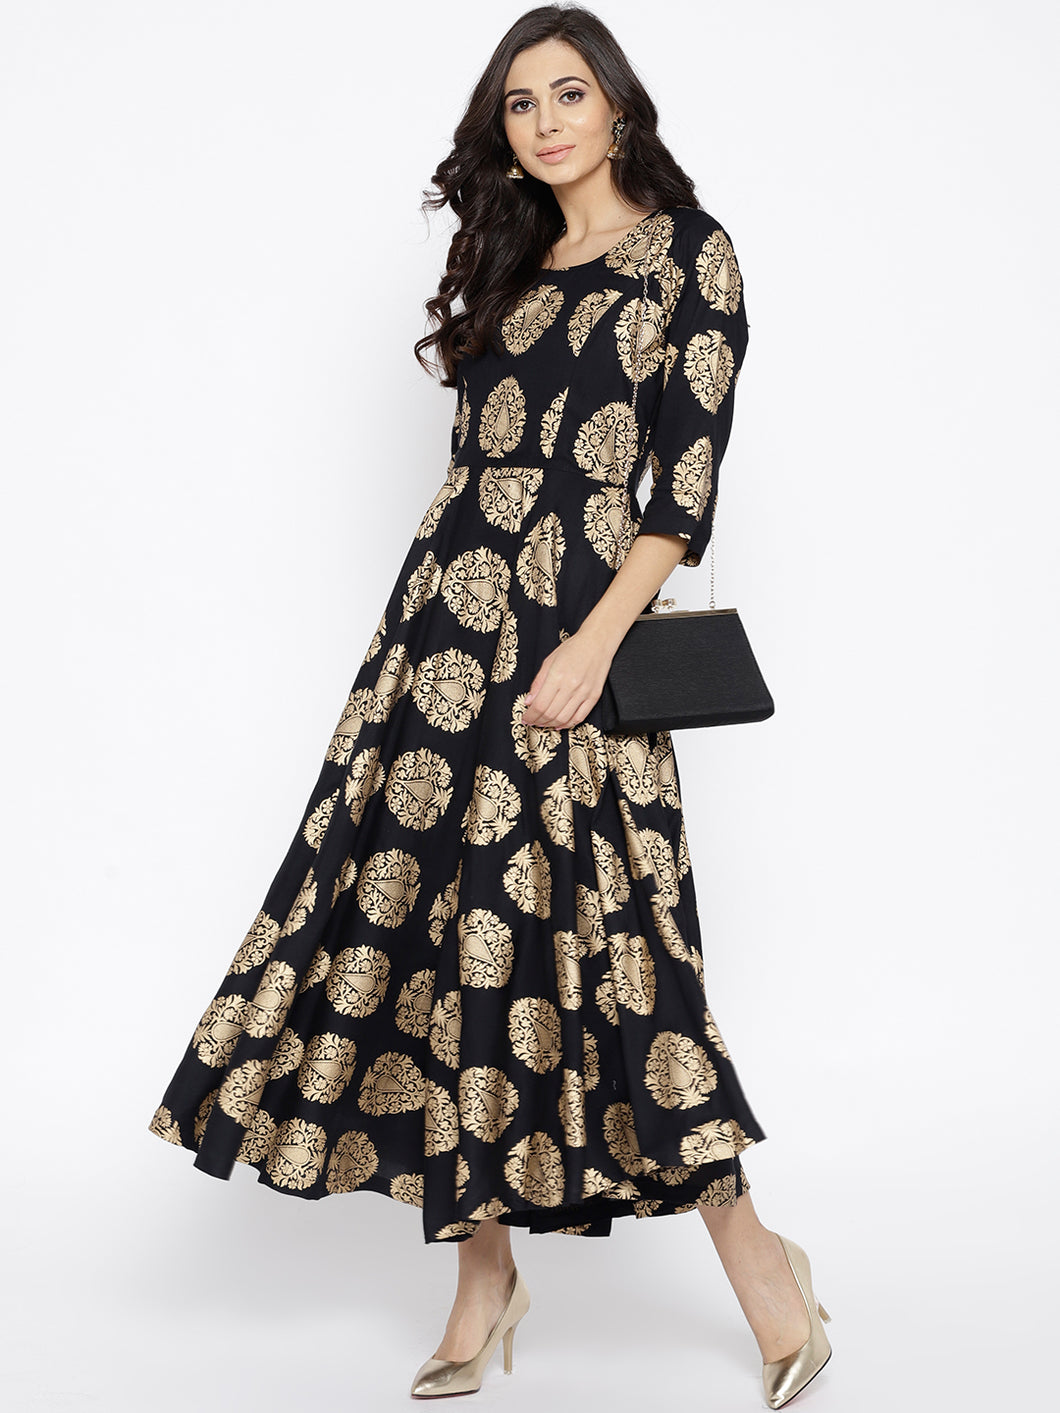 Women Black & Golden Printed Maxi Dress (PREORDER 2-4 WEEKS DELIVERY)